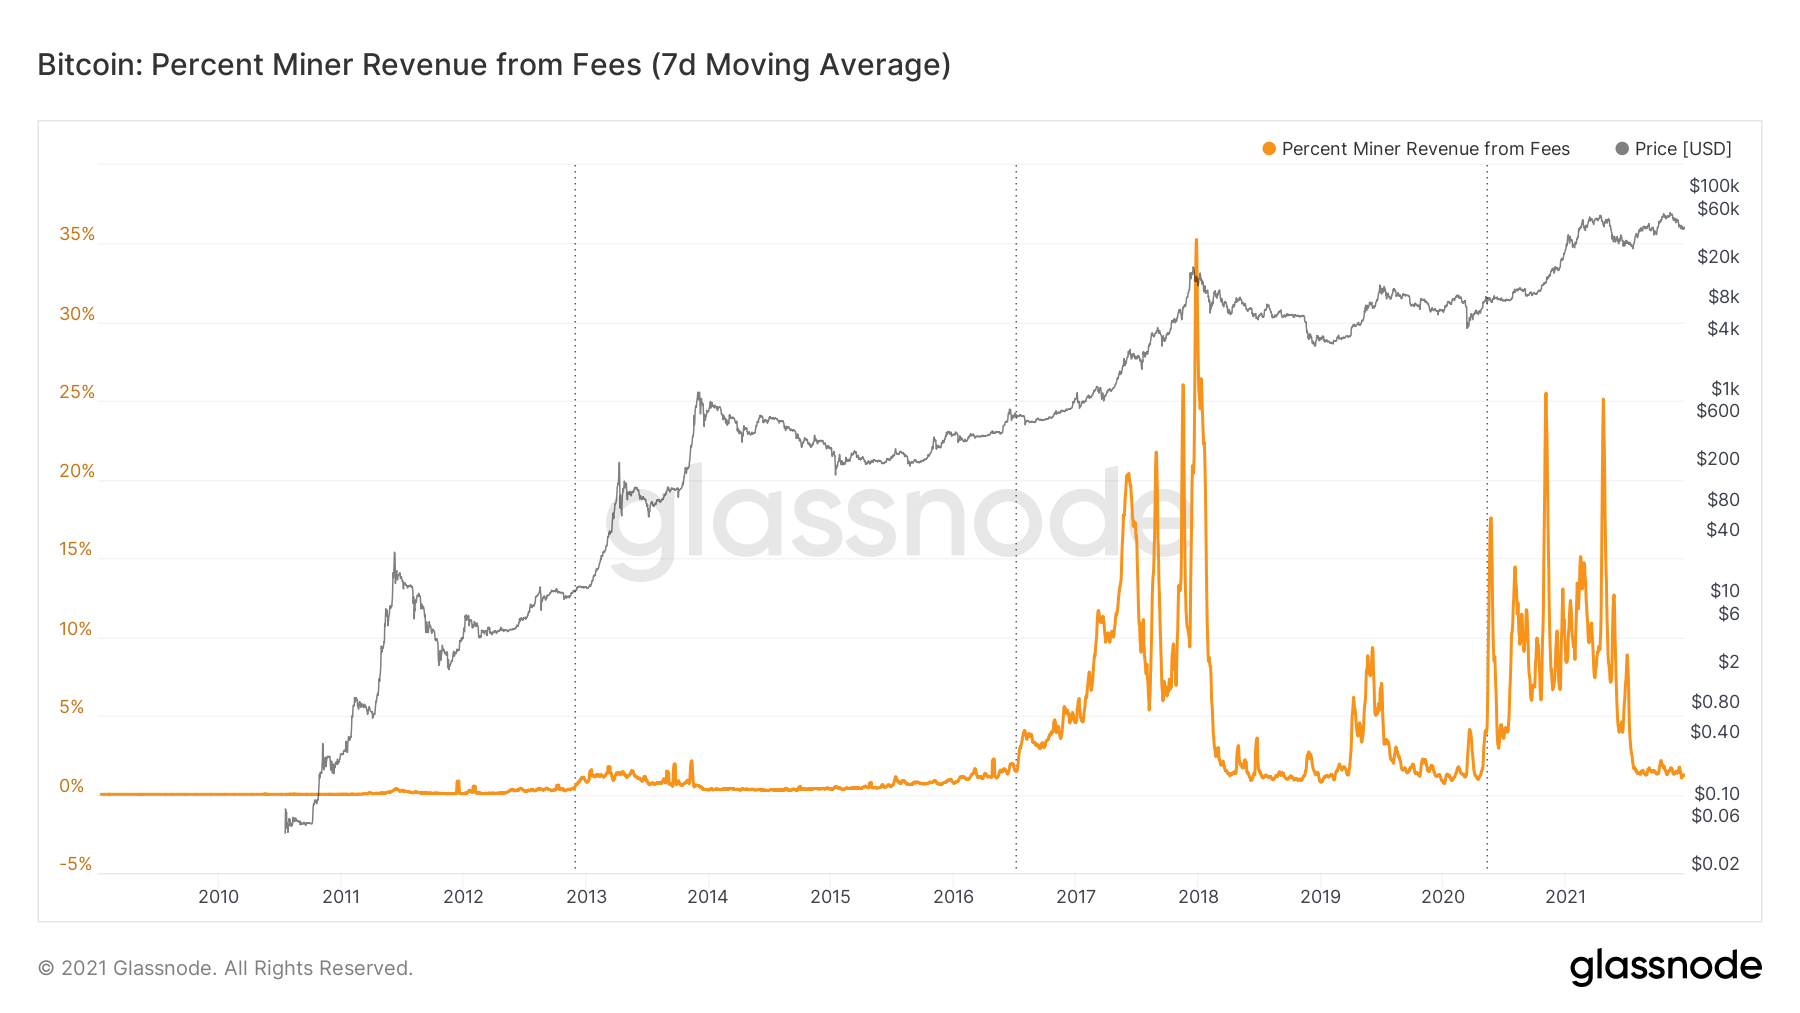 Bitcoin: Percent Miner Revenue from Fees